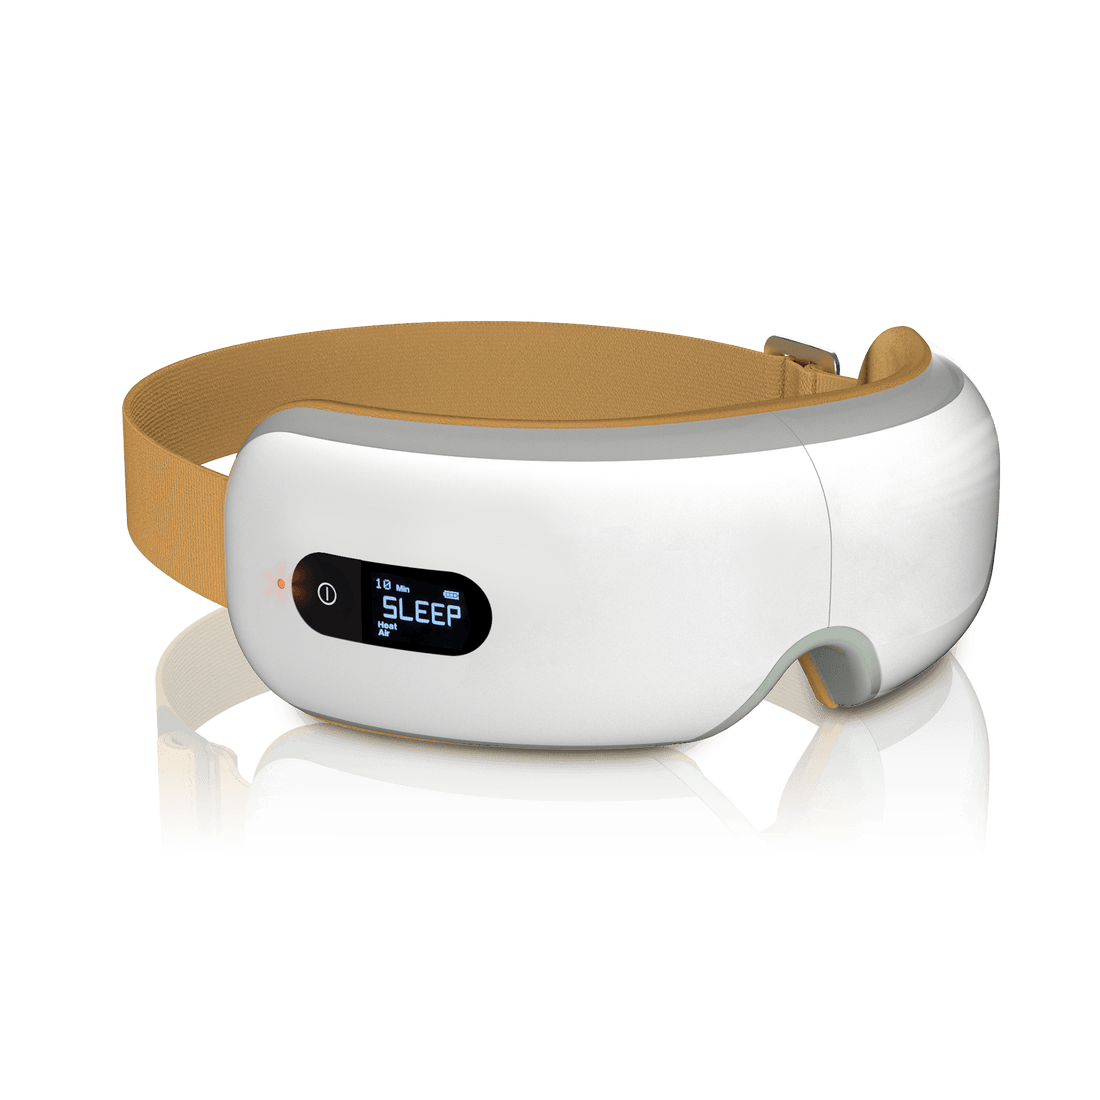 BreoiSee 3S Electric Eye Massager